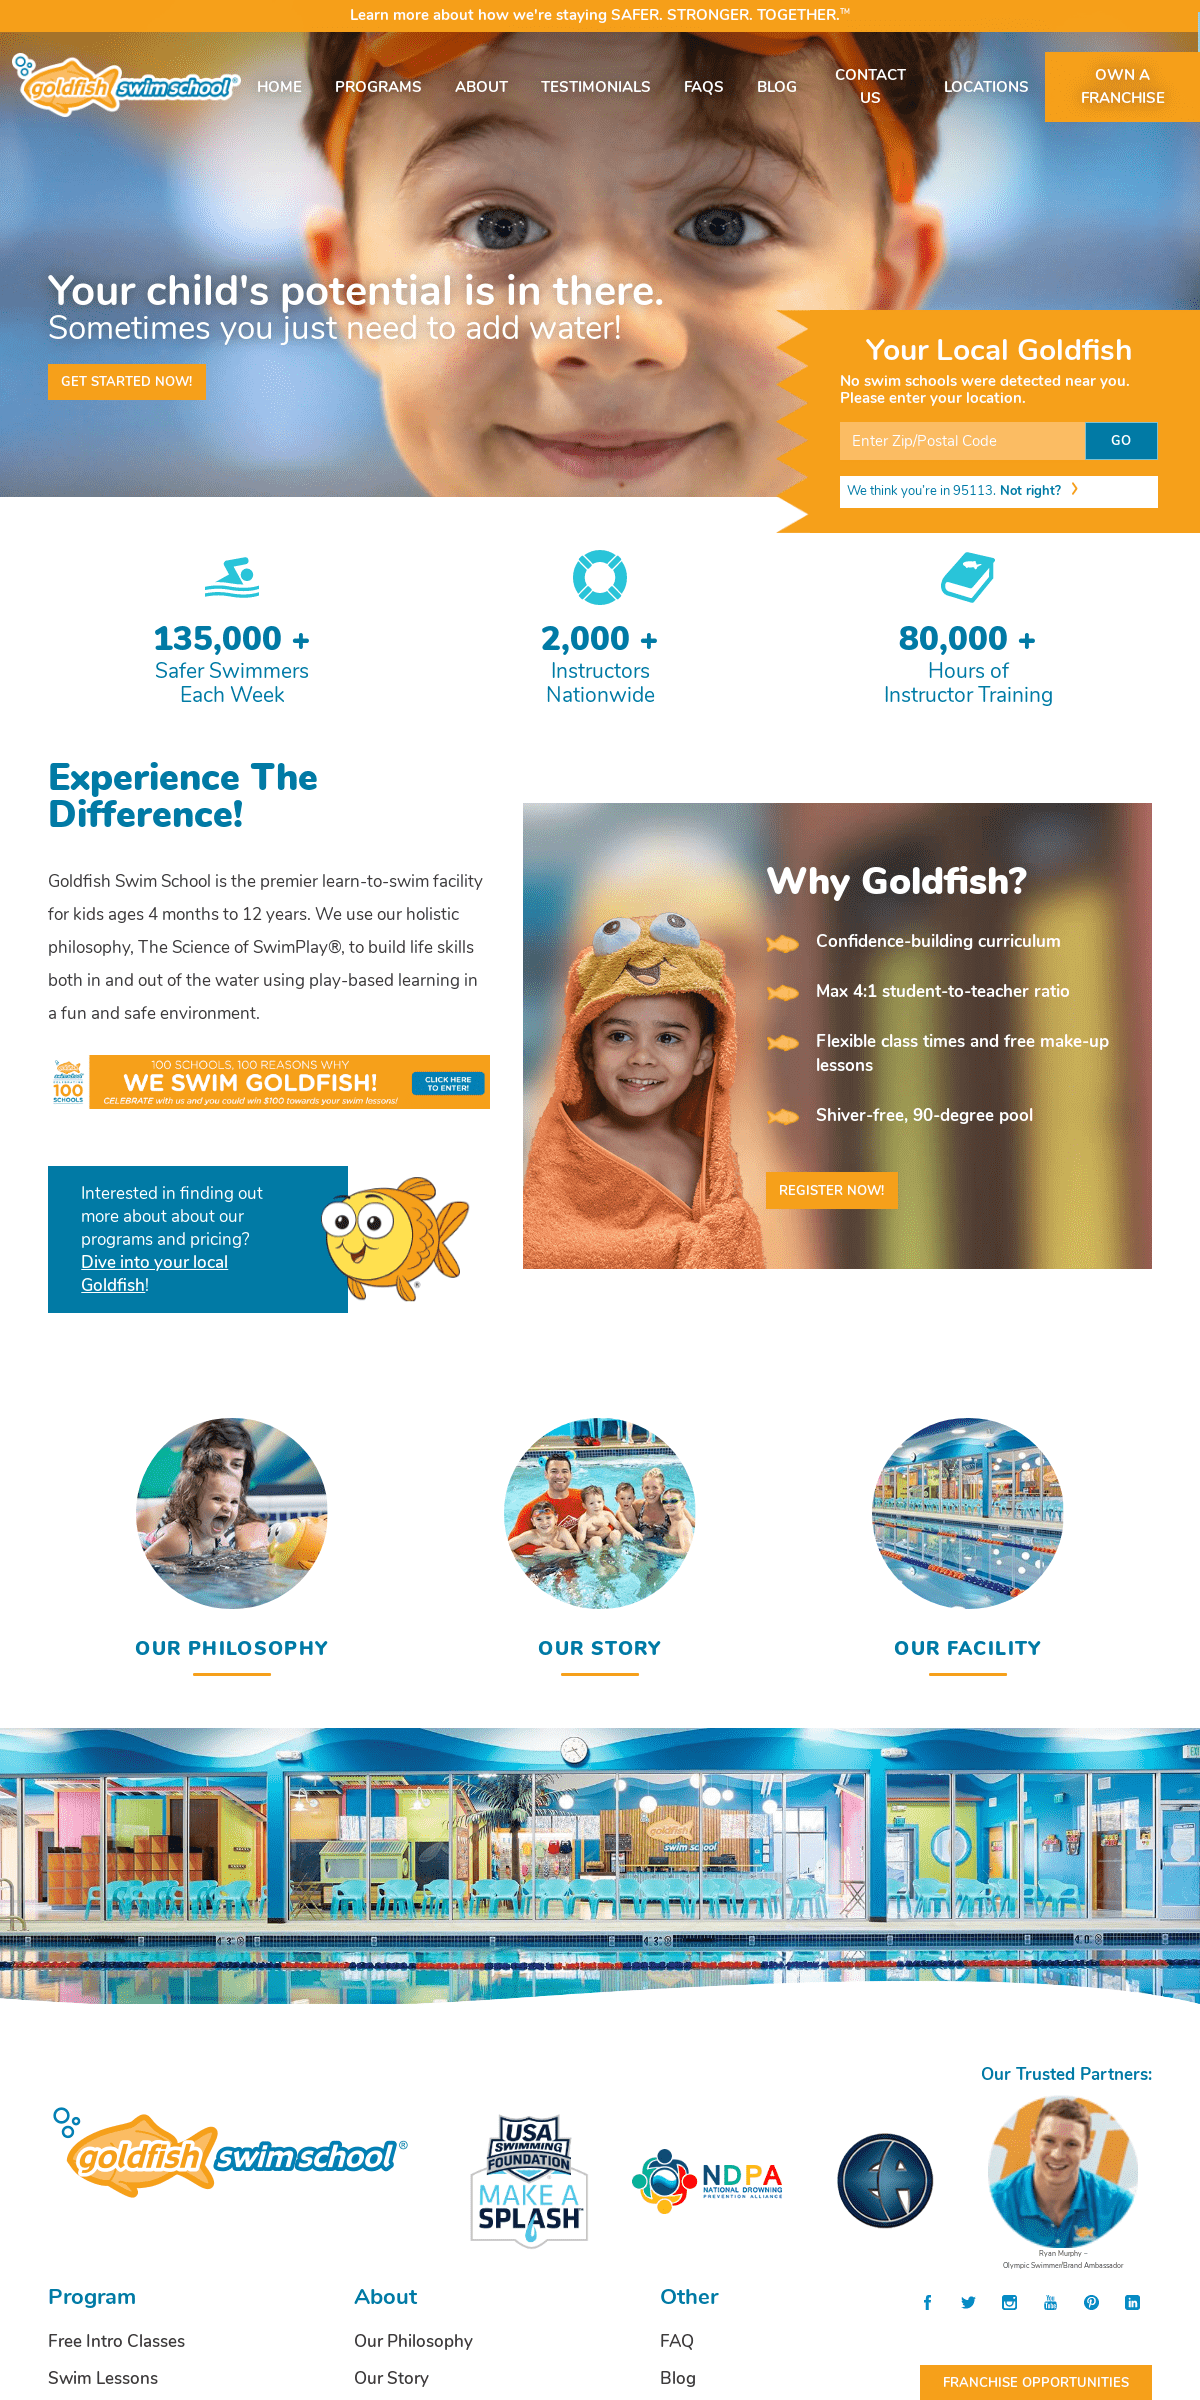 A complete backup of goldfishswimschool.com